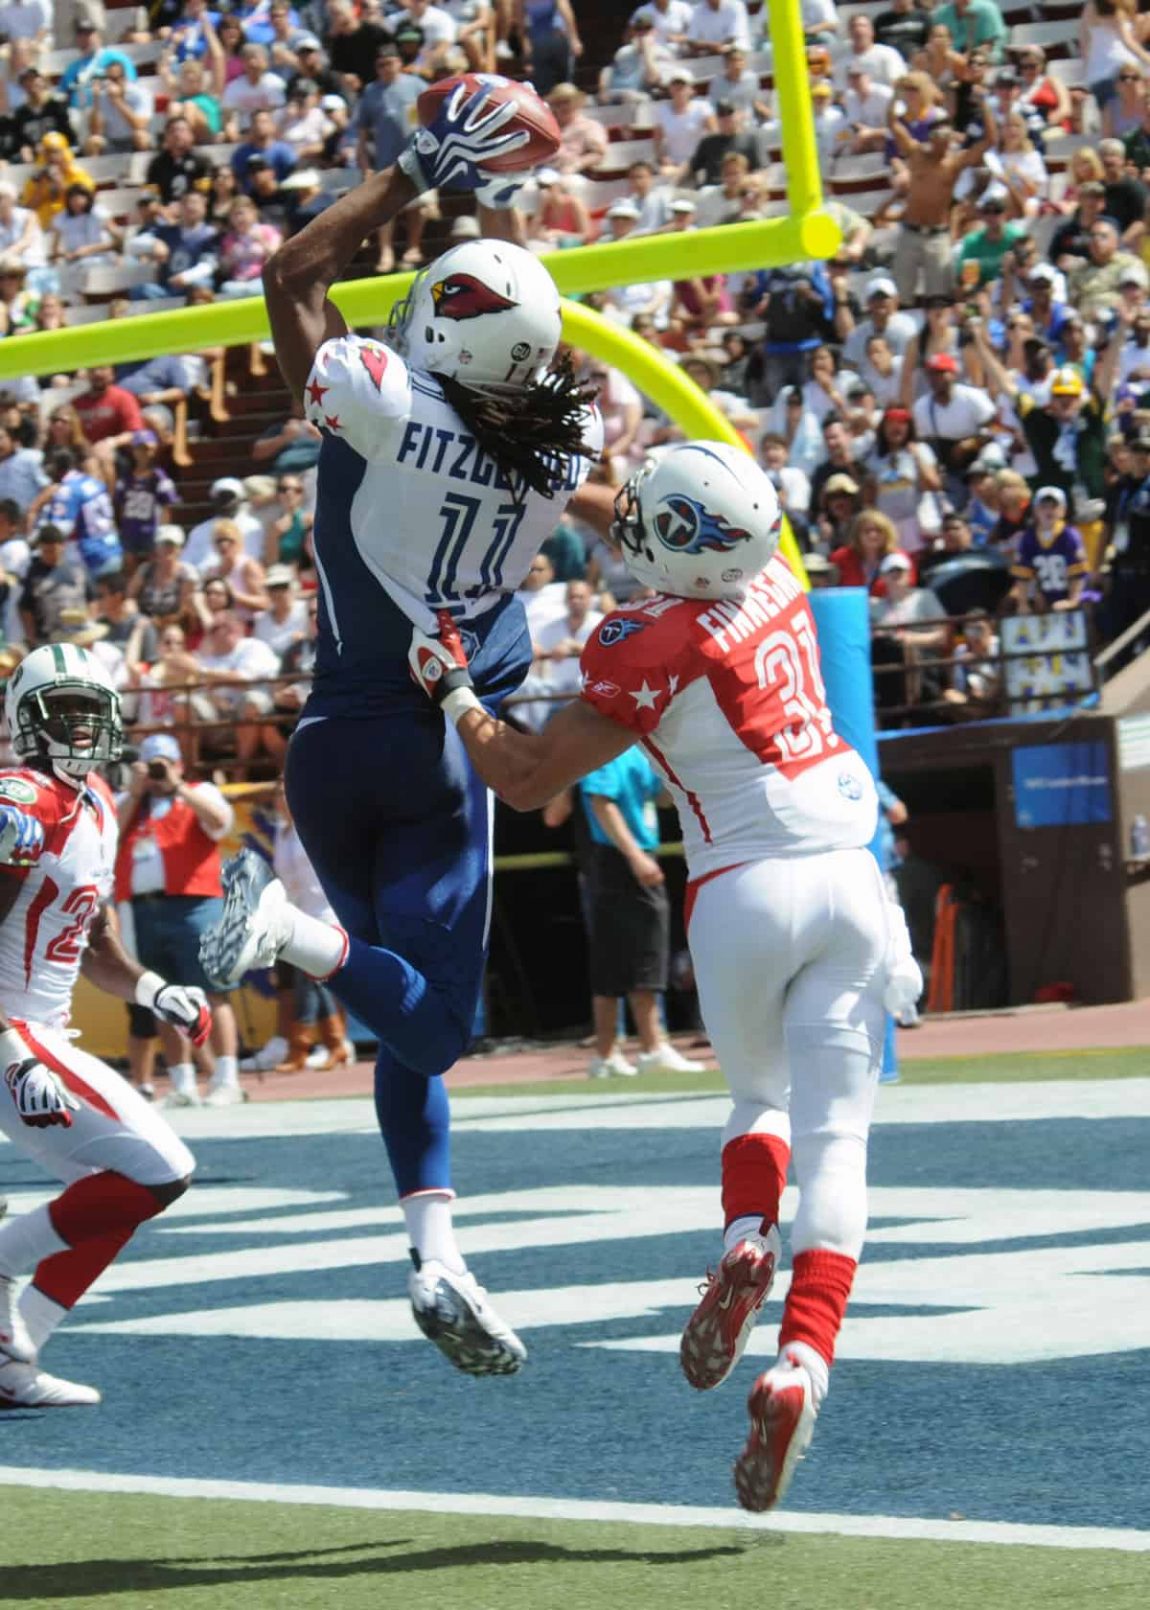 Larry Fitzgerald catches TD at 2009 Pro Bowl